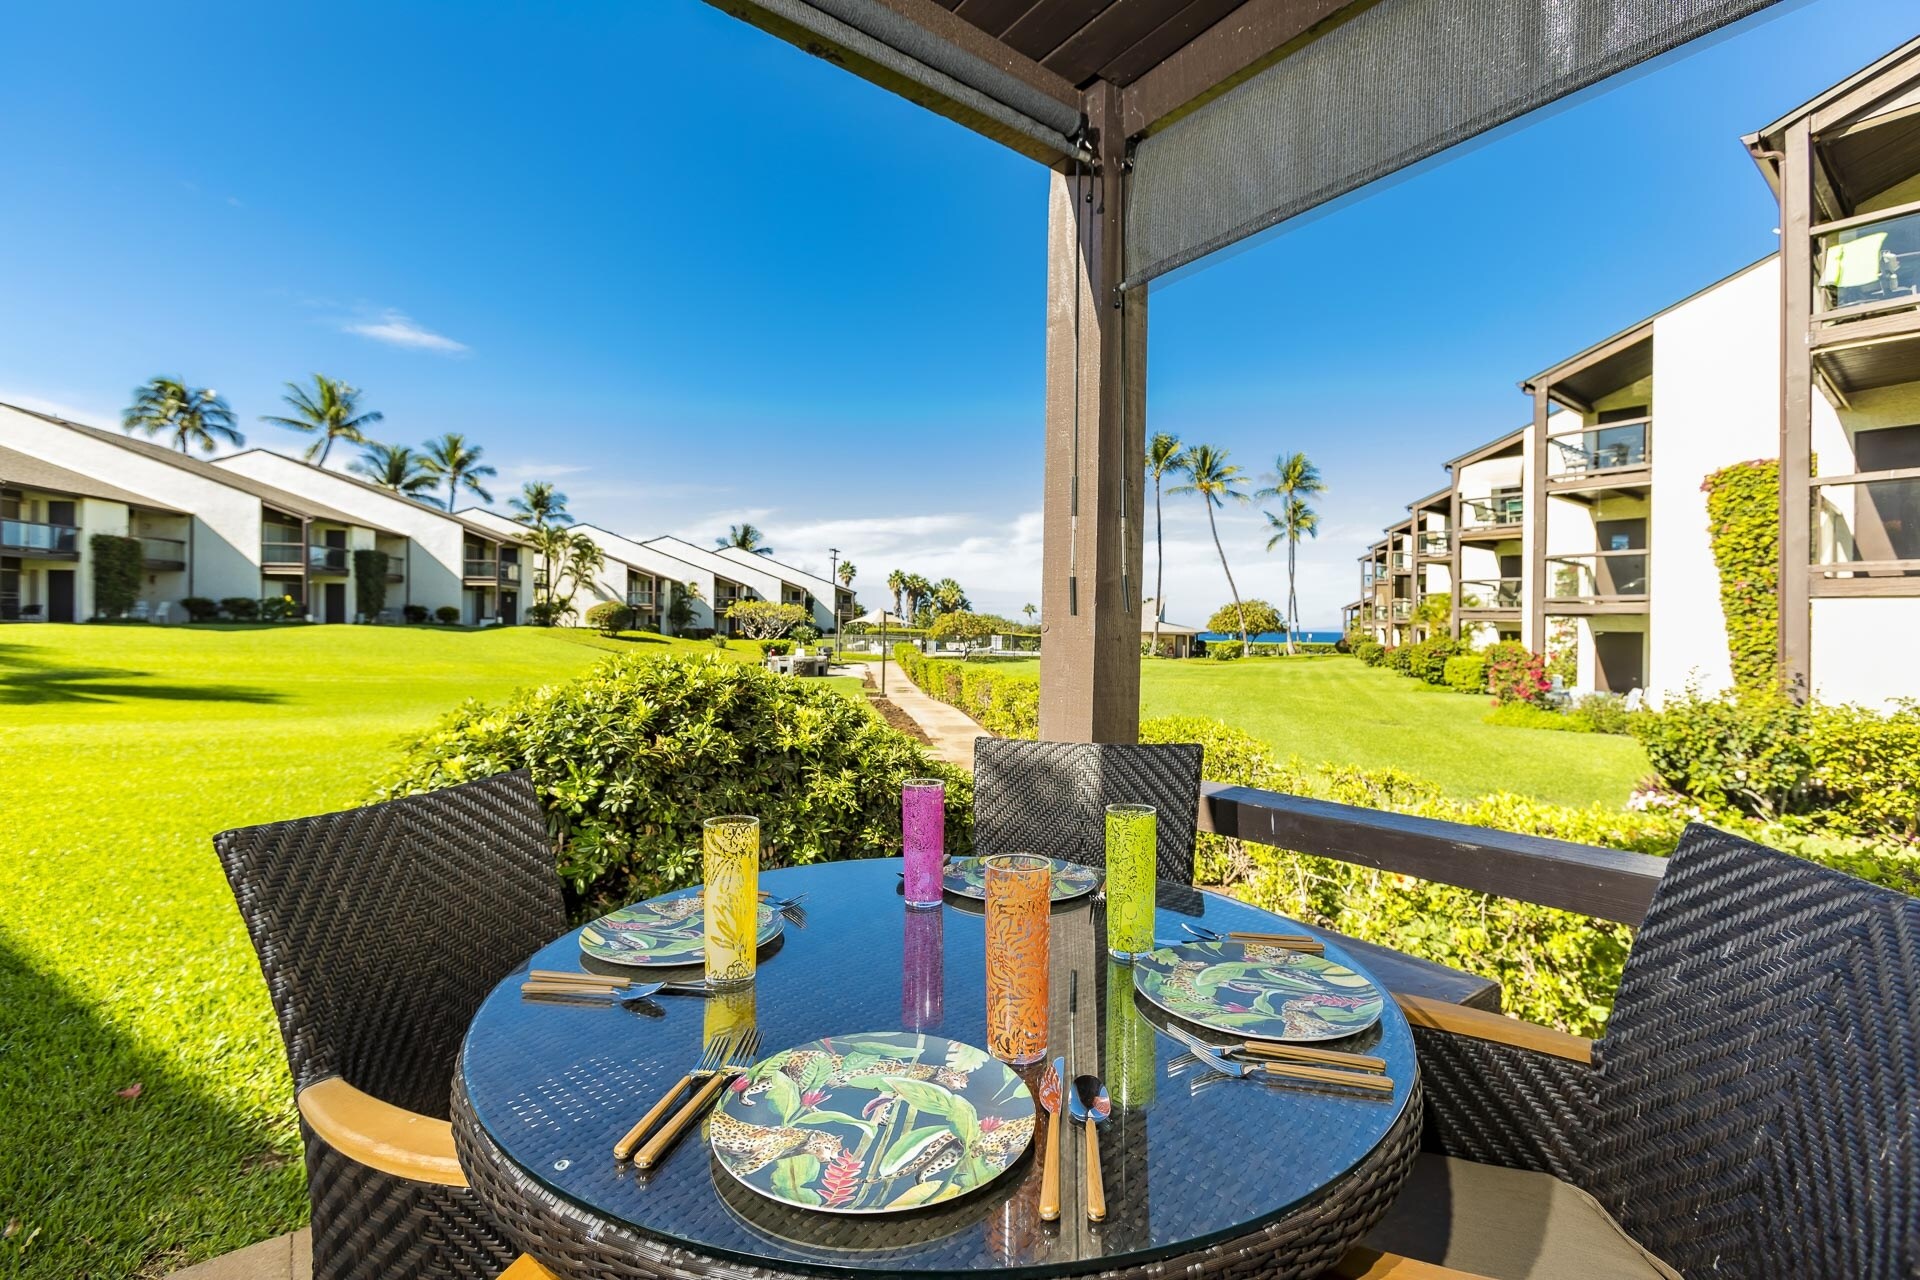 Take in the beautiful views while dining alfresco!